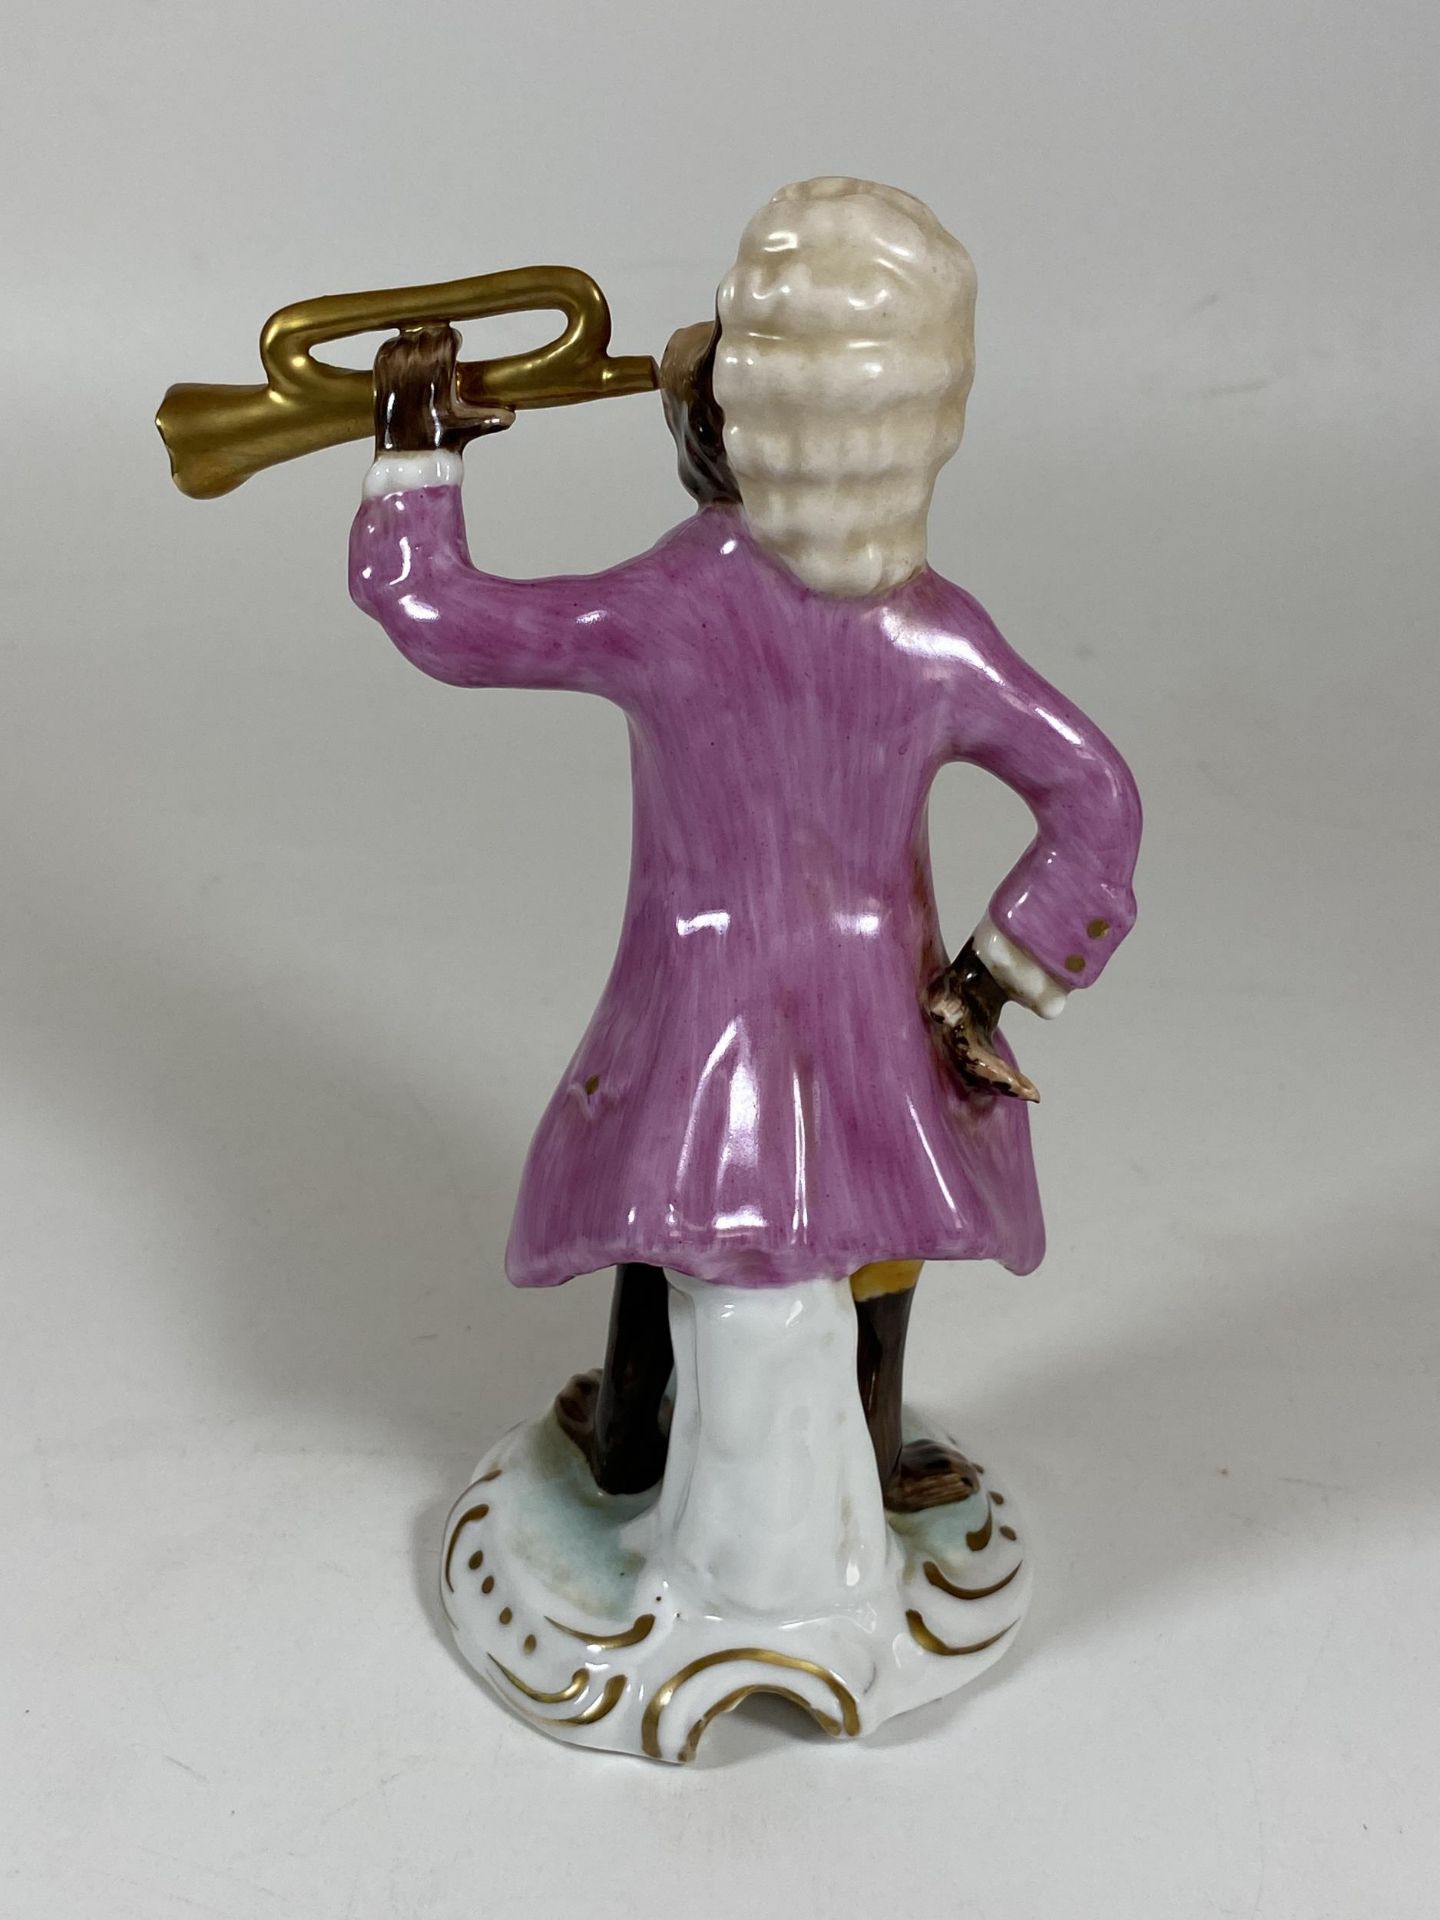 A CONTINENTAL DRESDEN STYLE PORCELAIN MONKEY TRUMPET PLAYER MUSICIAN FIGURE, HEIGHT 15.5CM - Image 3 of 5